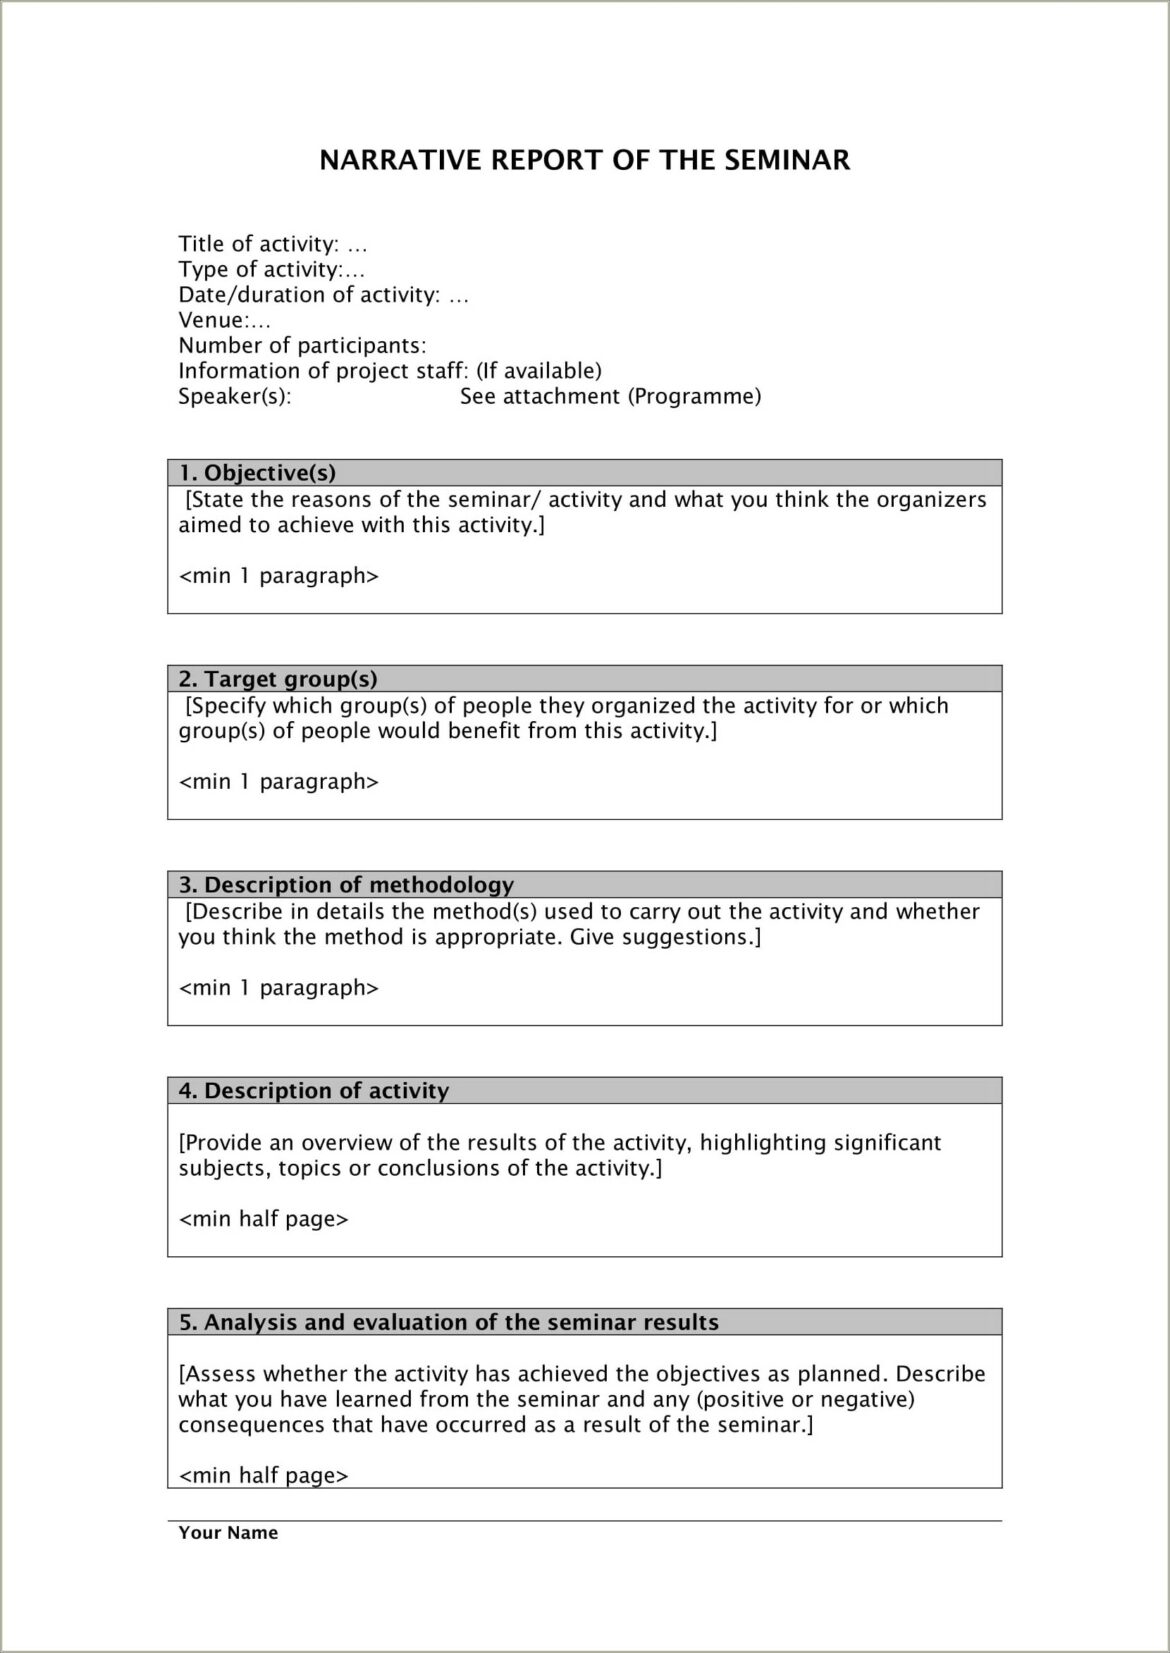 Sample Resume Narrative Report Introduction Example